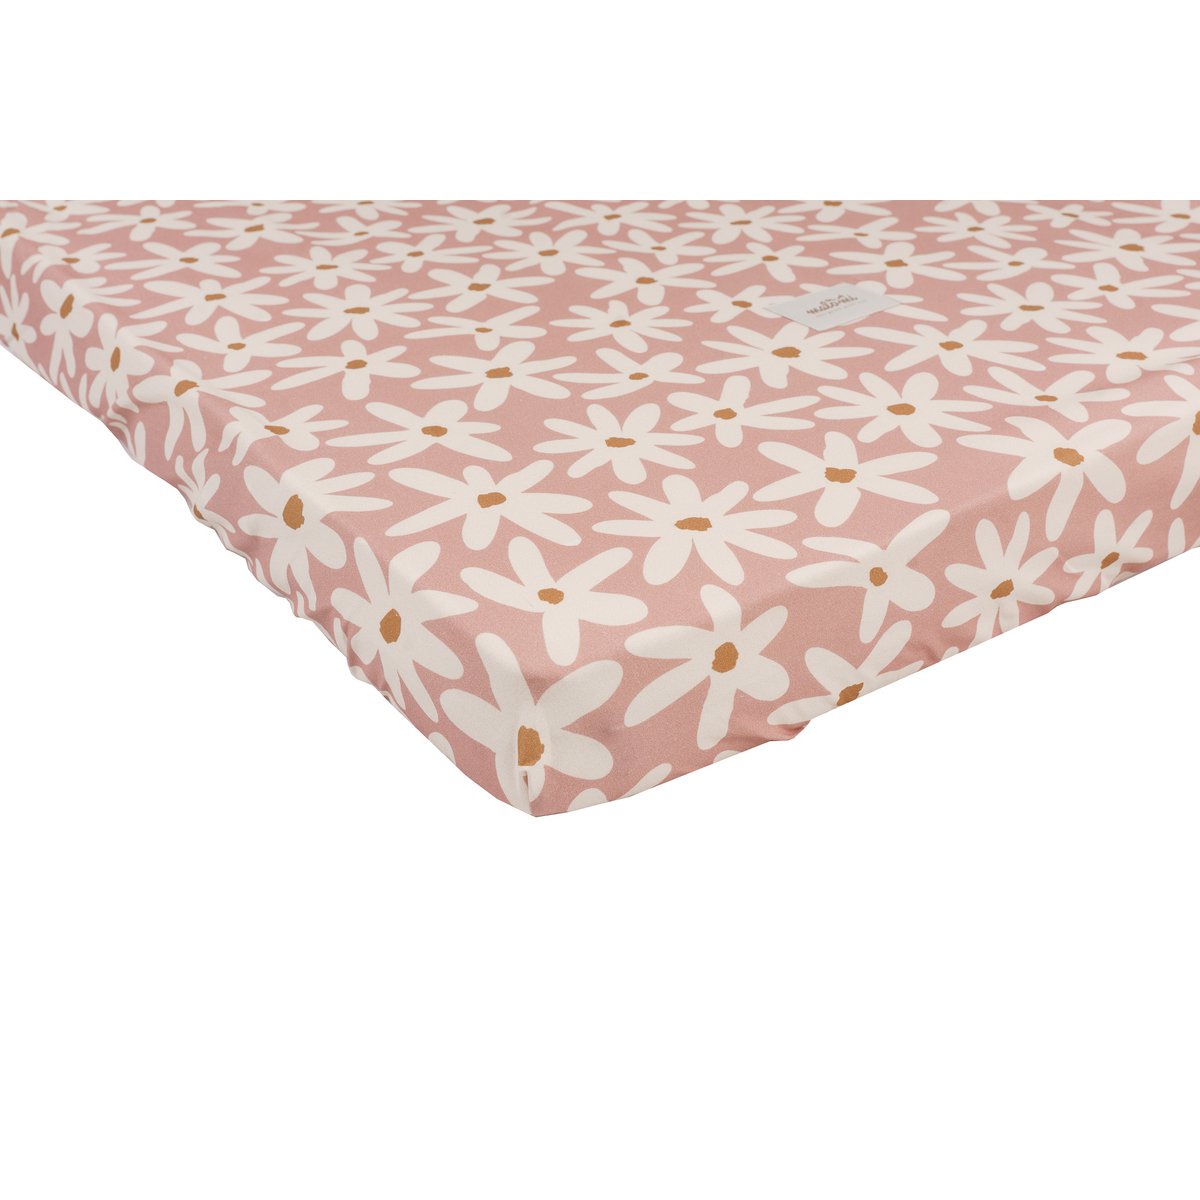 Fitted bedsheet - Blush daisies